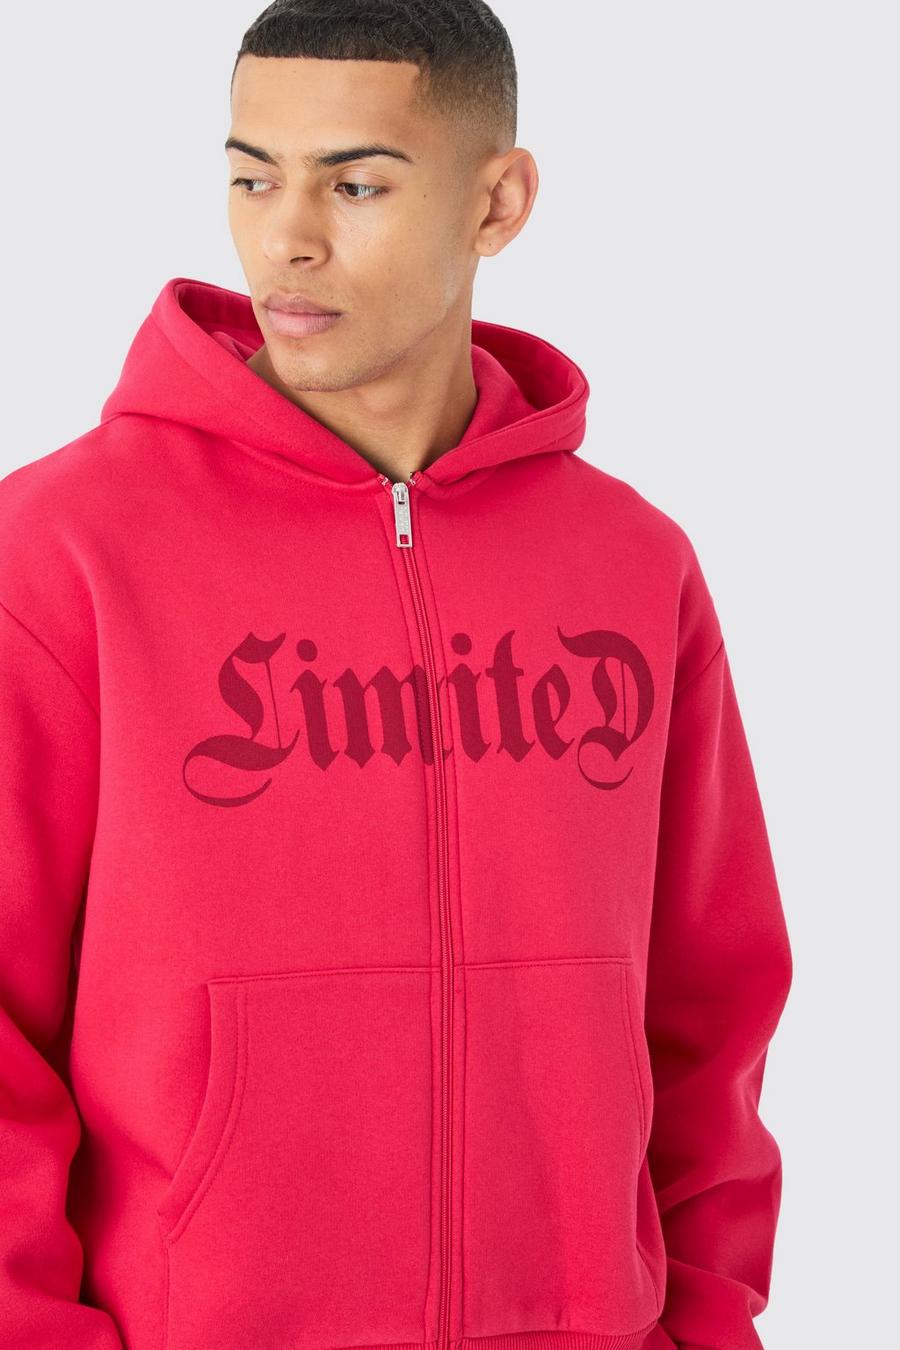 Sudadera oversize recta Limited con capucha y cremallera, Red image number 1